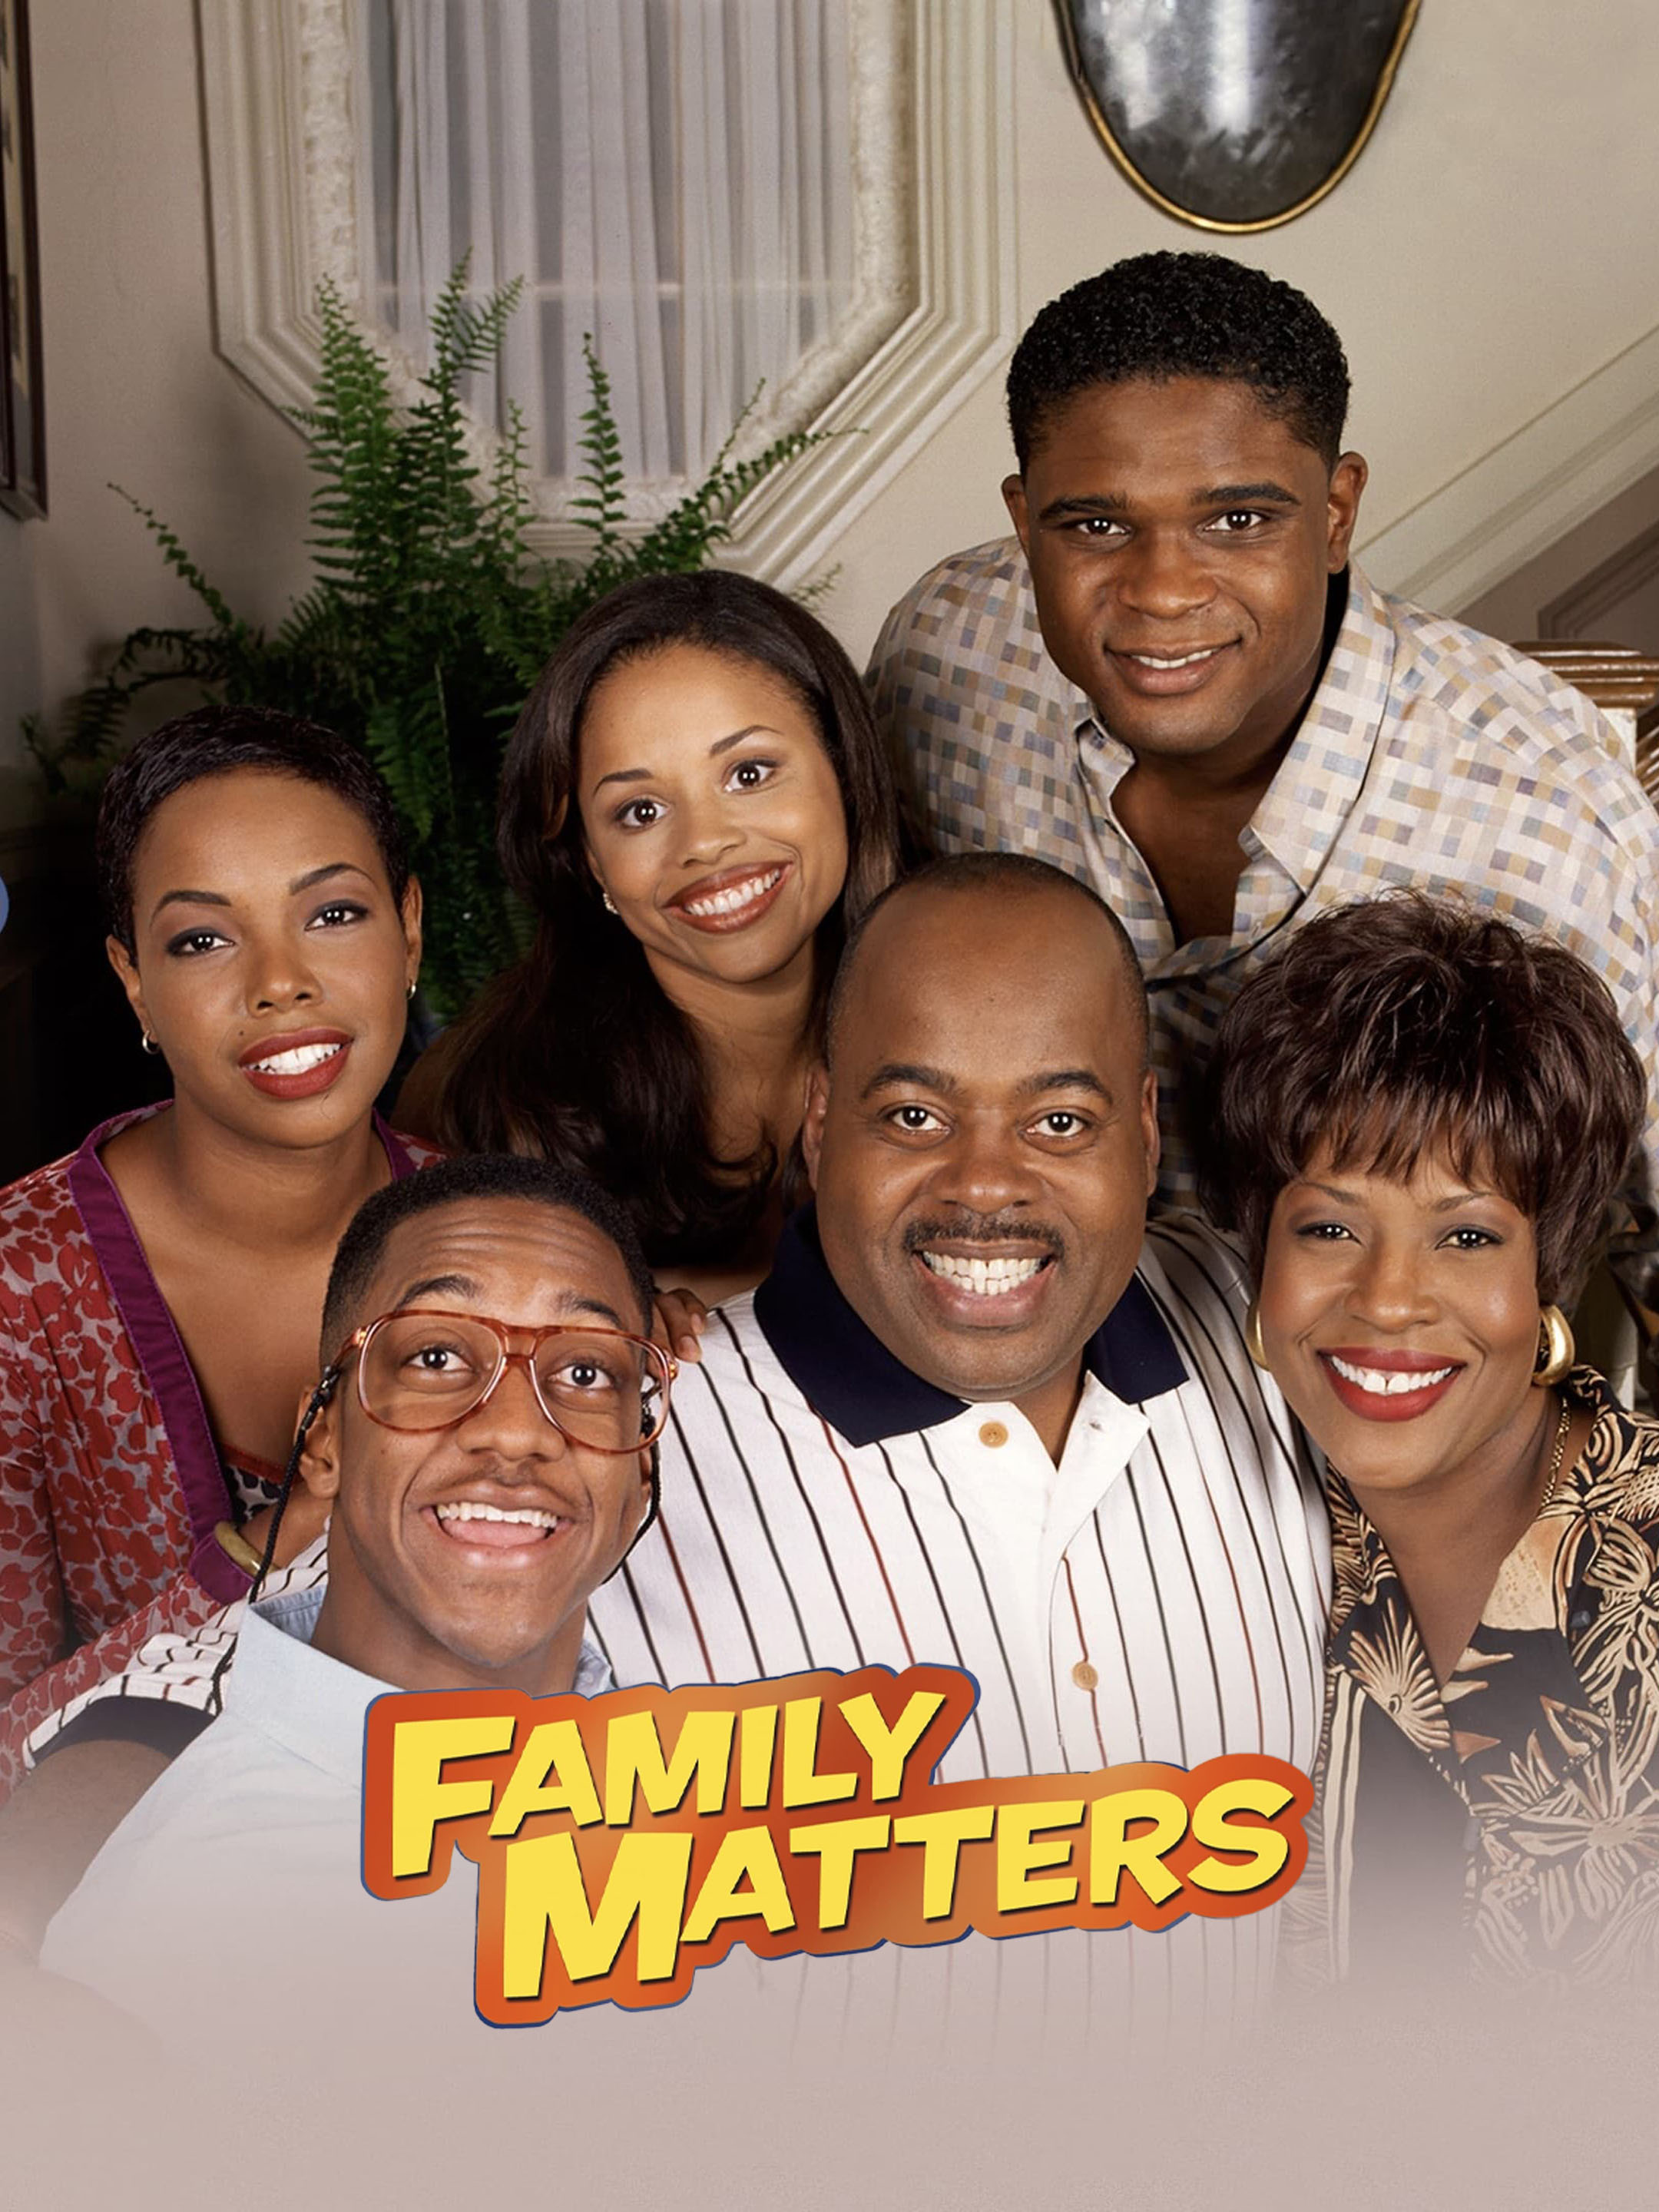 laura family matters 2022